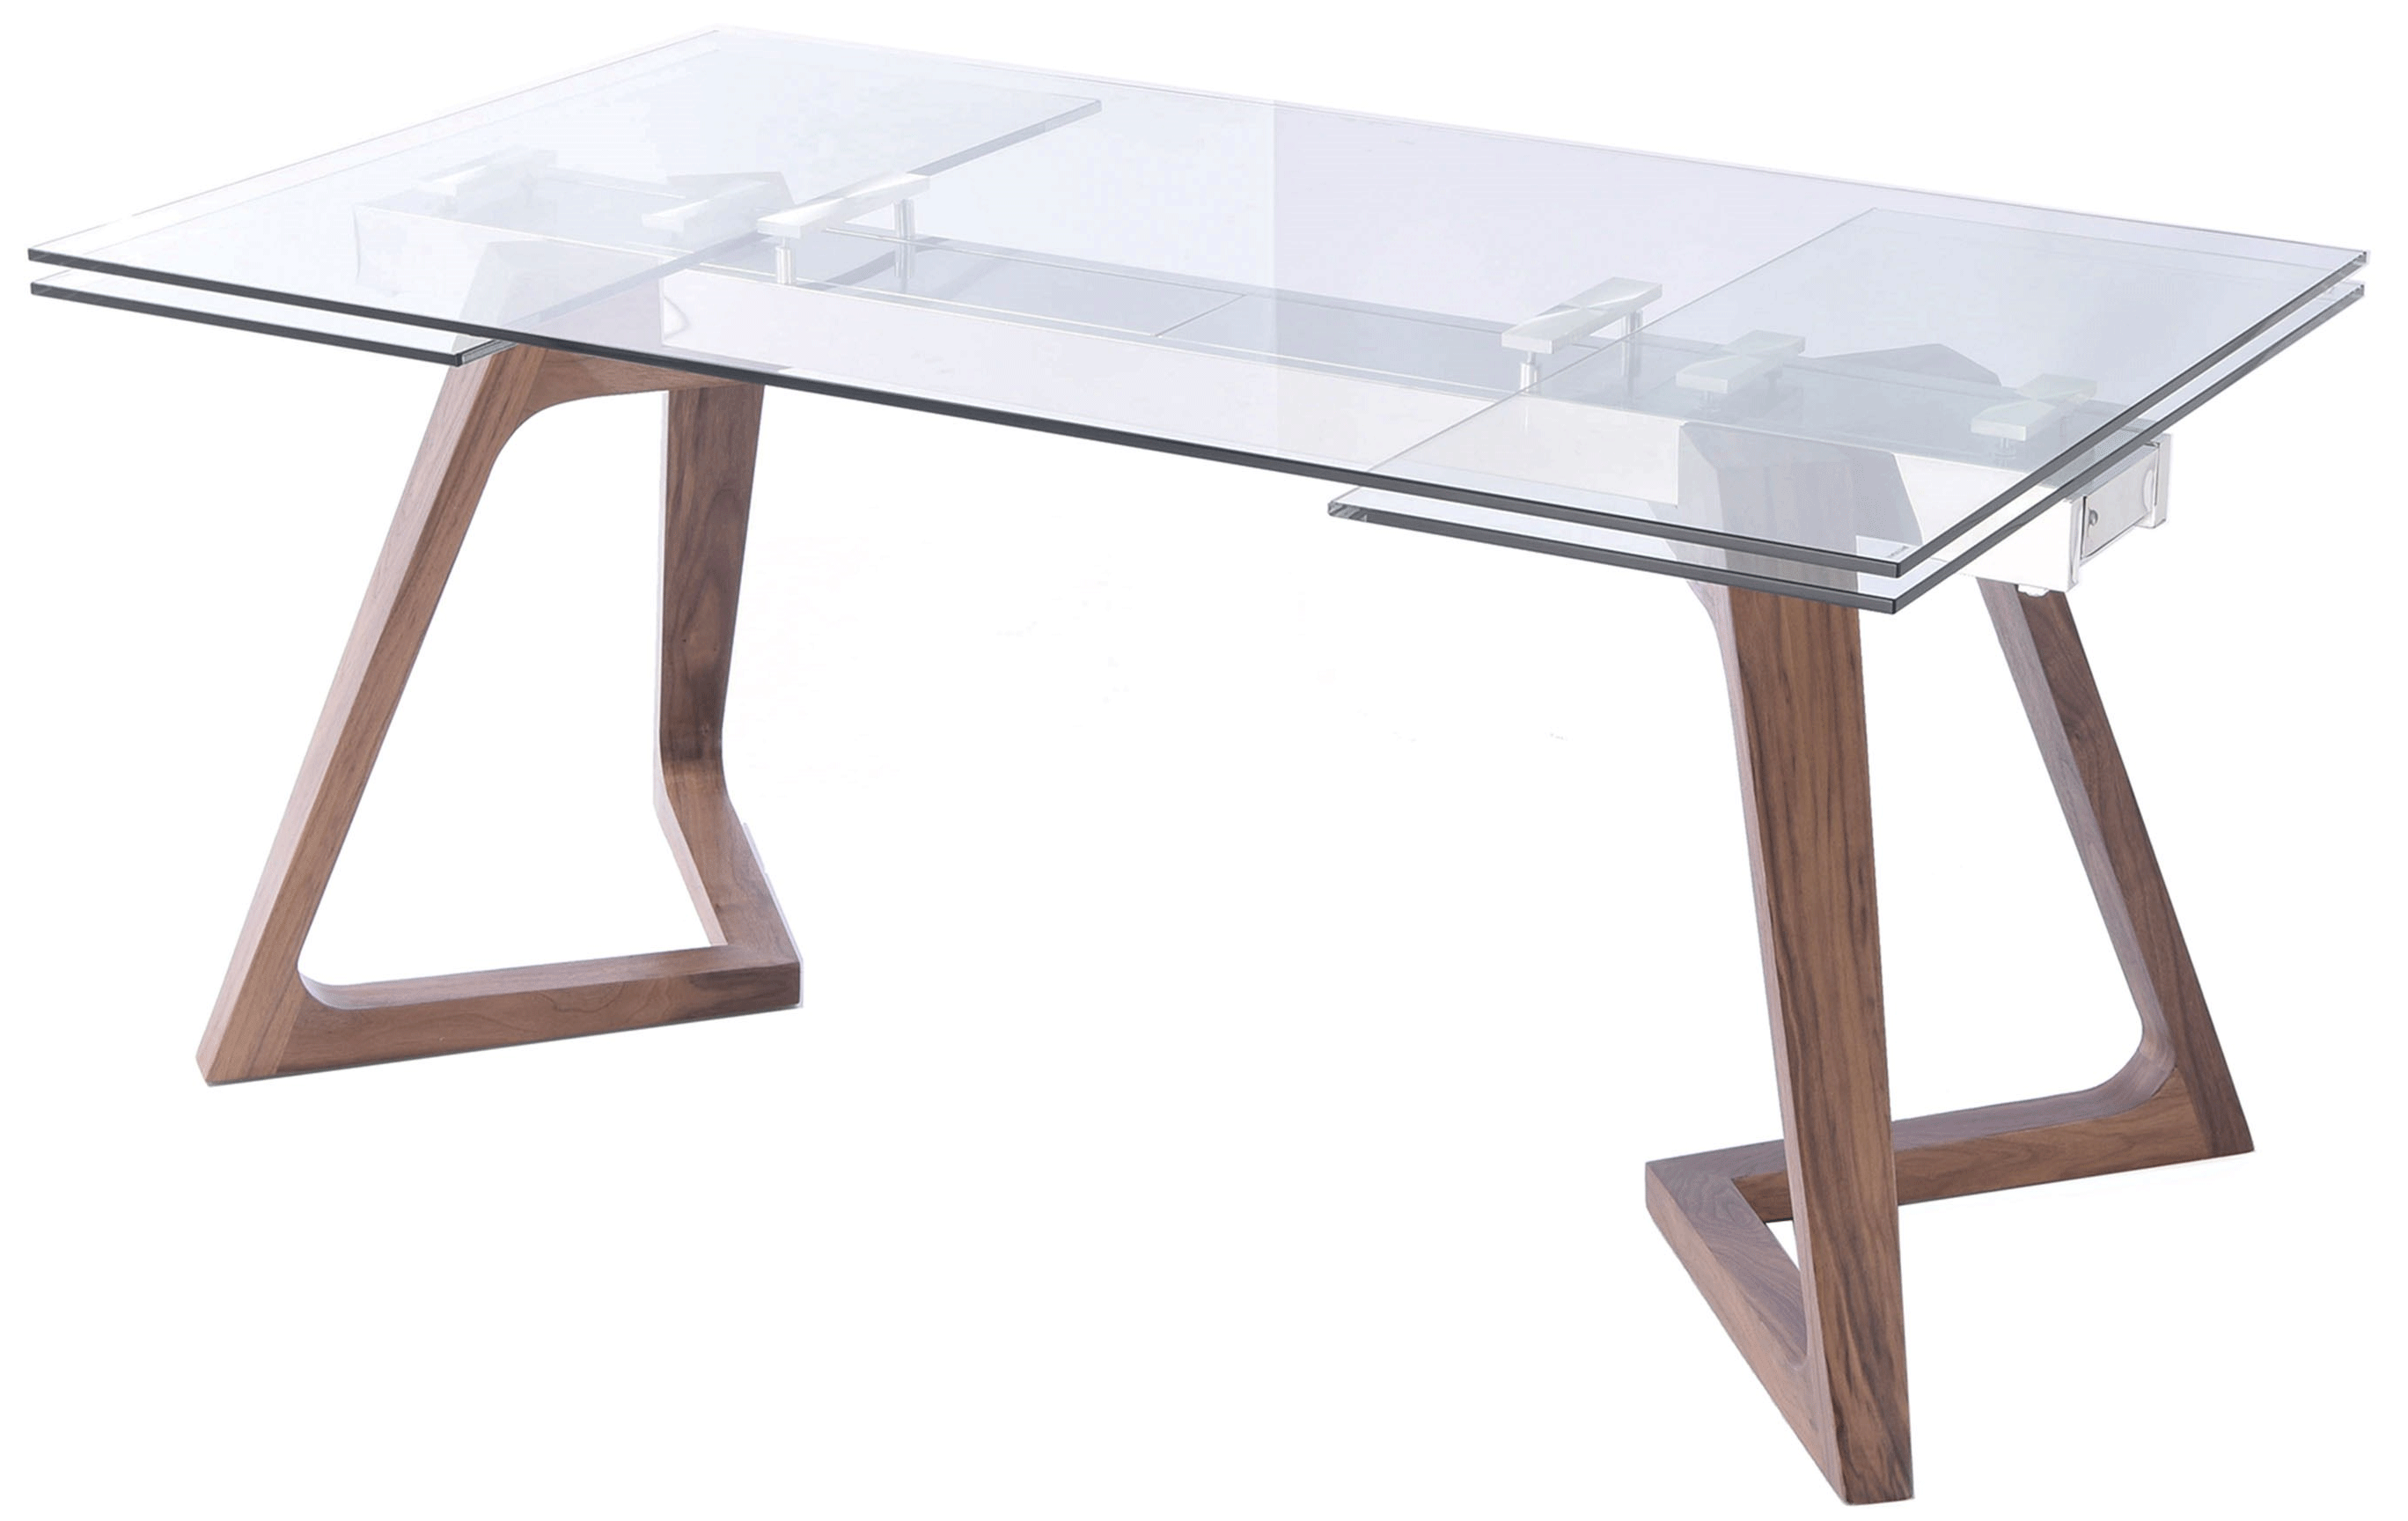 Dining Room Furniture Marble-Look Tables 8811 Table